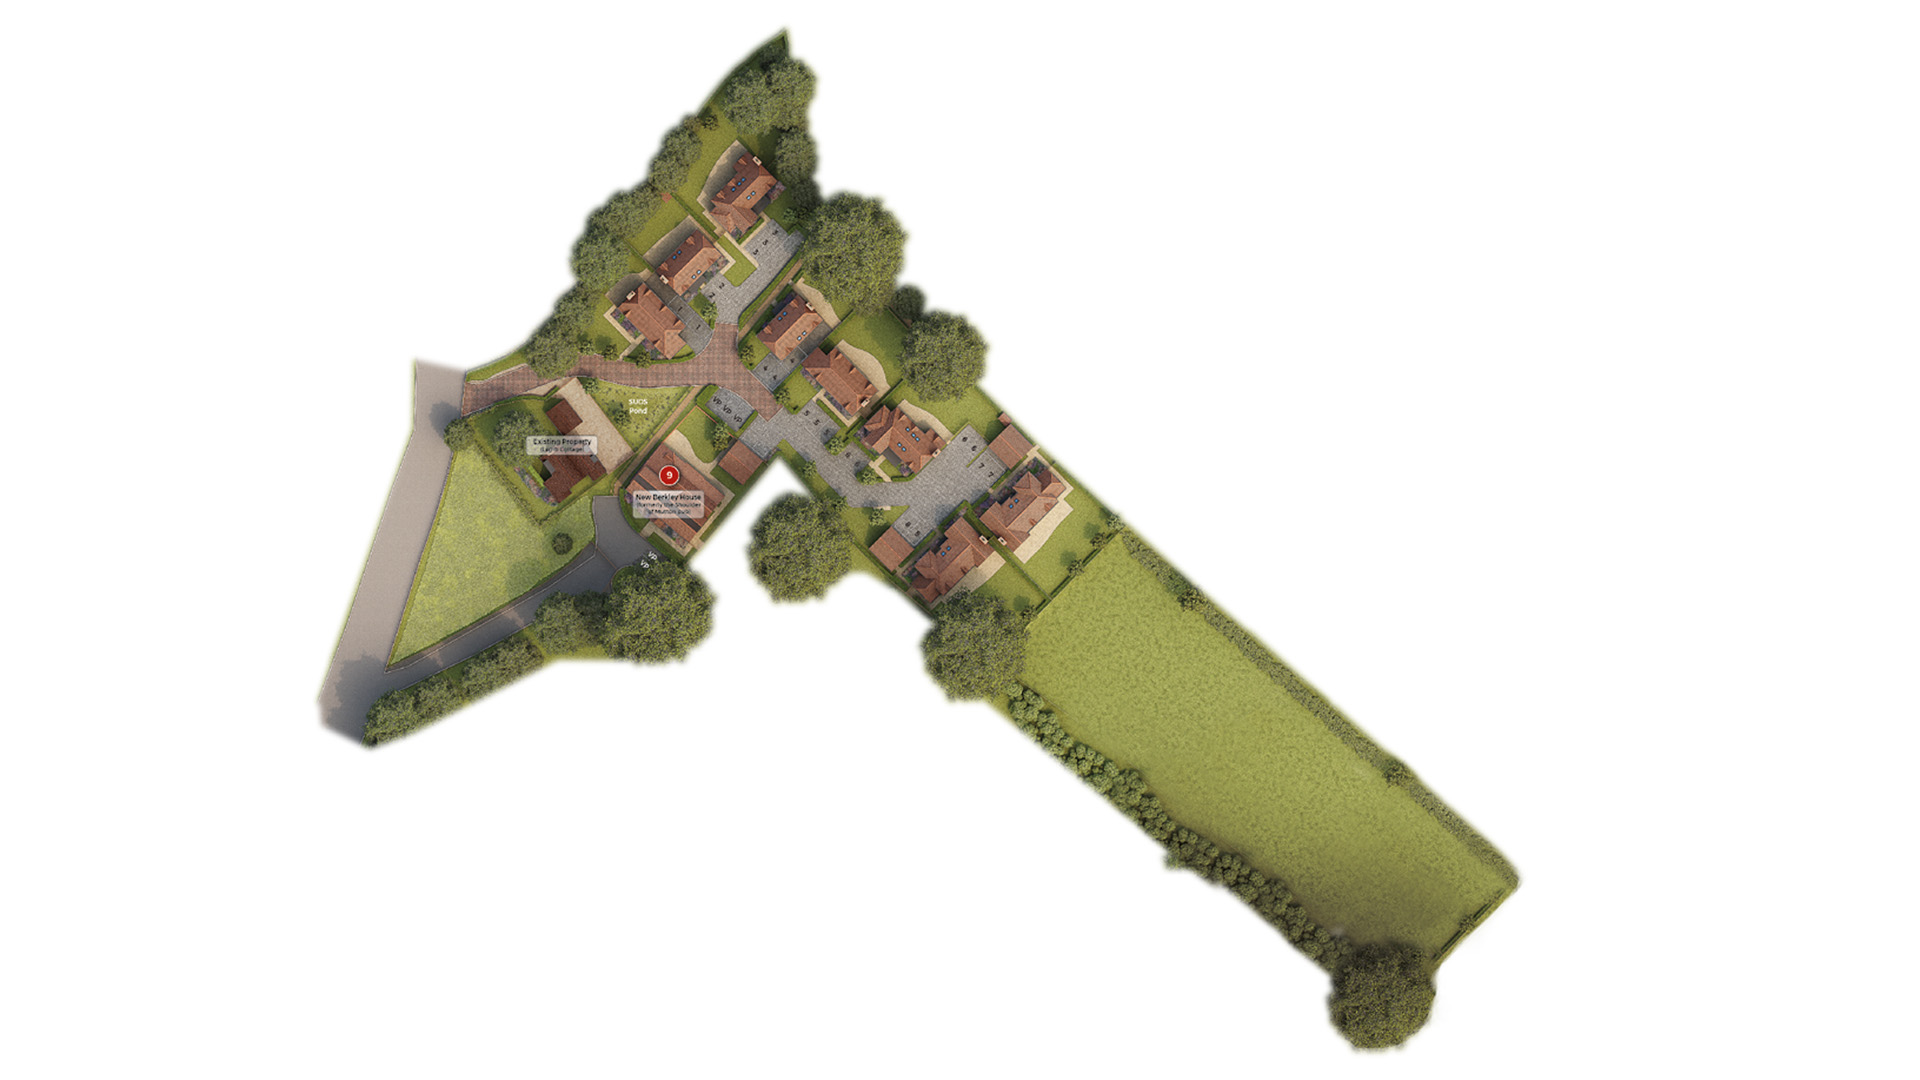 New houses in Buckinghamshire Site Map